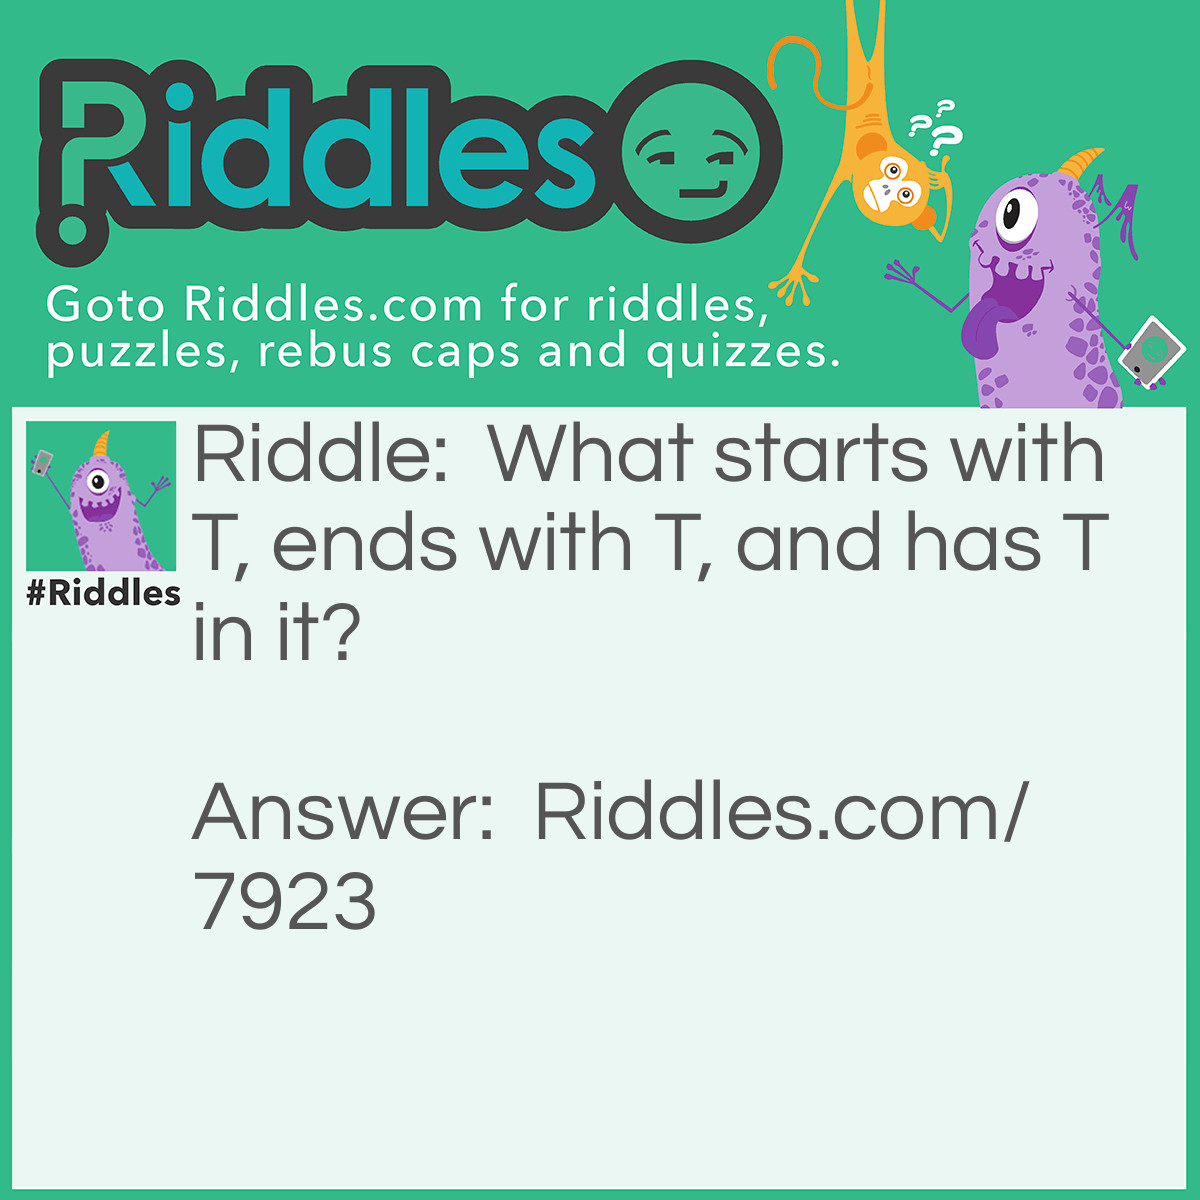 Riddle: What starts with T, ends with T, and has T in it? Answer: A Teapot.